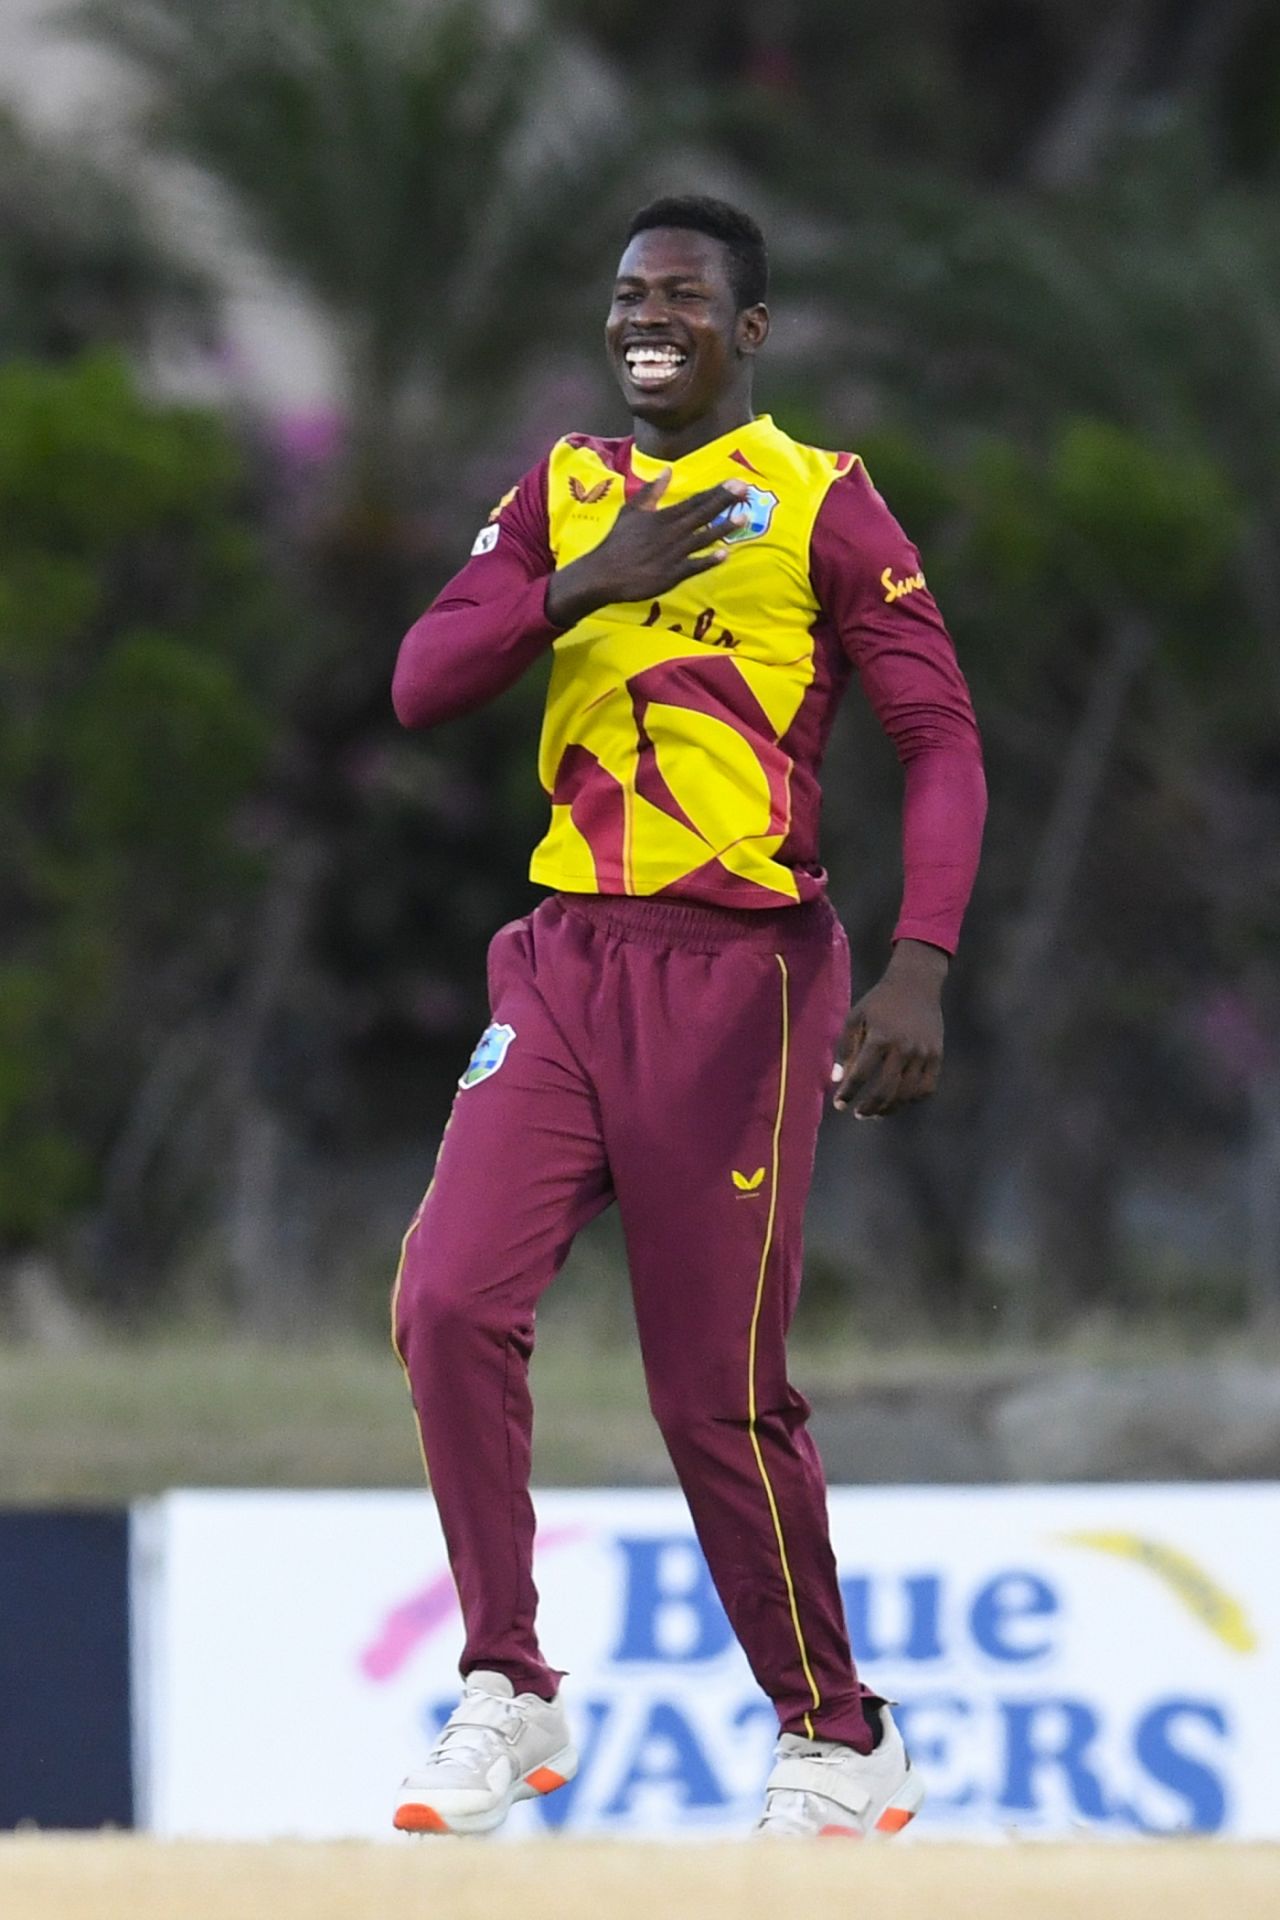 Kevin Sinclair celebrates a wicket, West Indies vs Sri Lanka, 3rd T20I, Coolidge, March 7, 2021